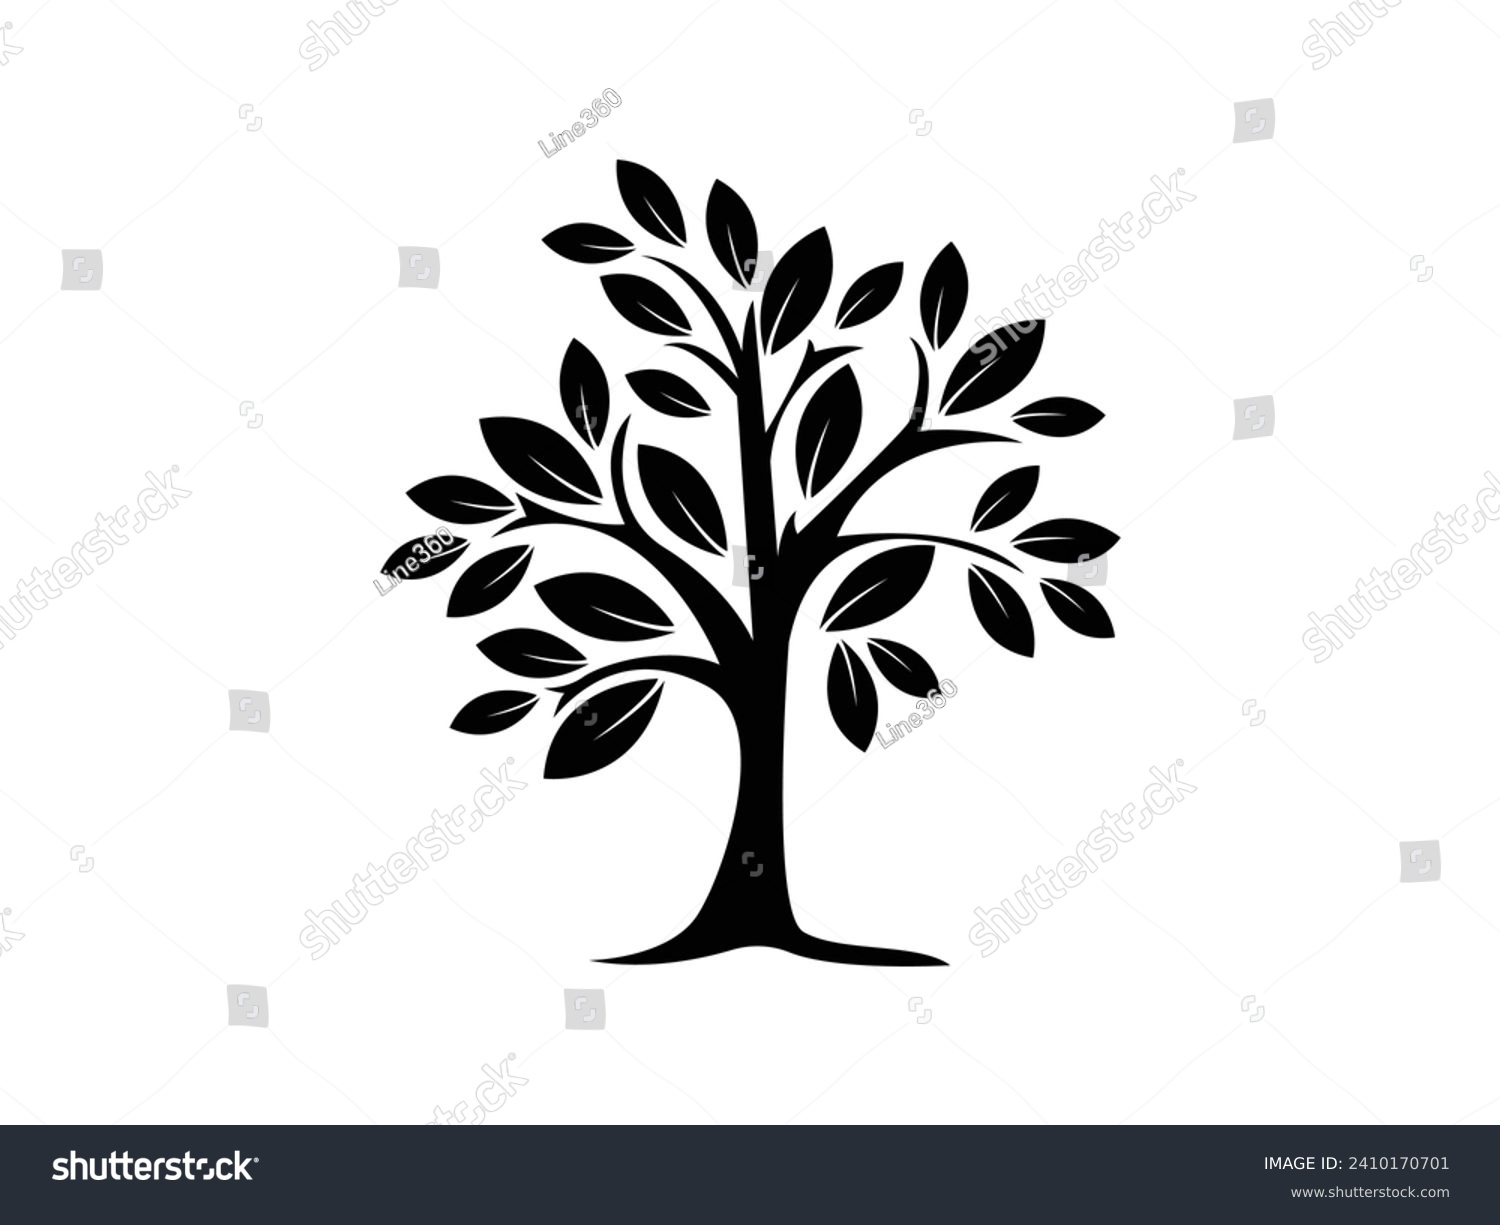 SVG of Tree with Roots Icon Vector illustration. trees symbol. branch leaf sign, emblem isolated on white background, Flat style for graphic and silhouette, logo. EPS10 black pictogram. svg